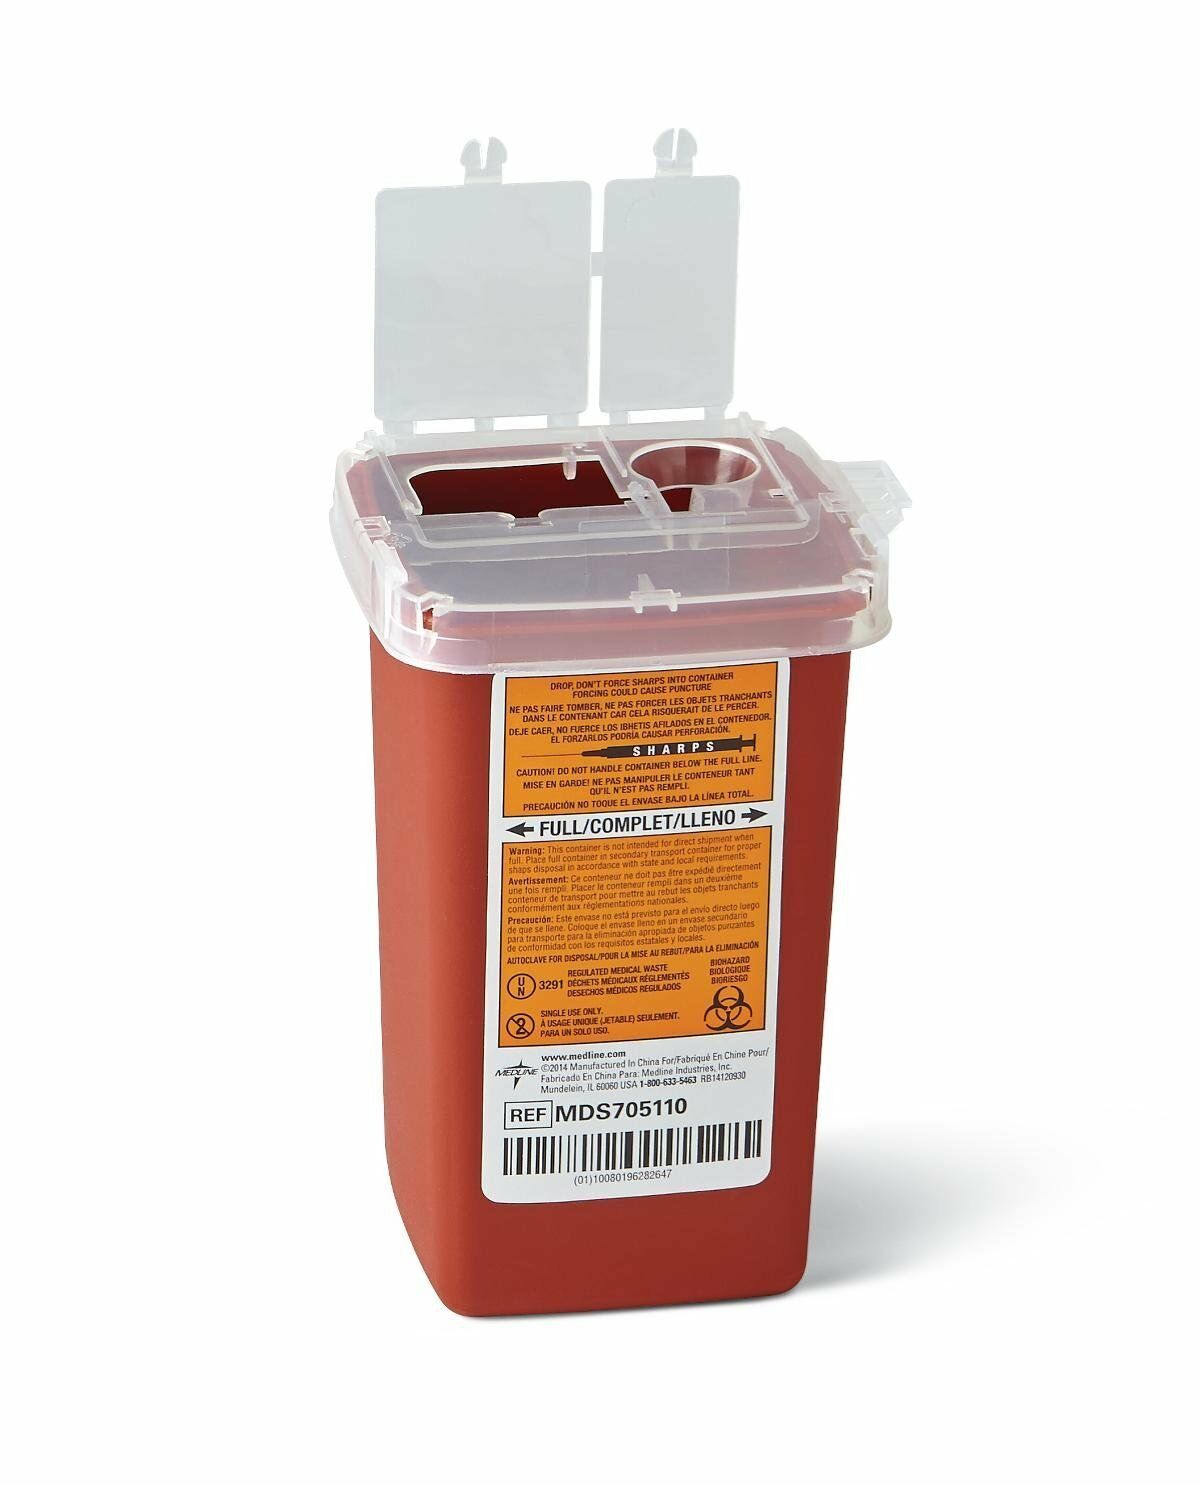 New Sharps Container Biohazard Needle Disposal 1 Qt Size